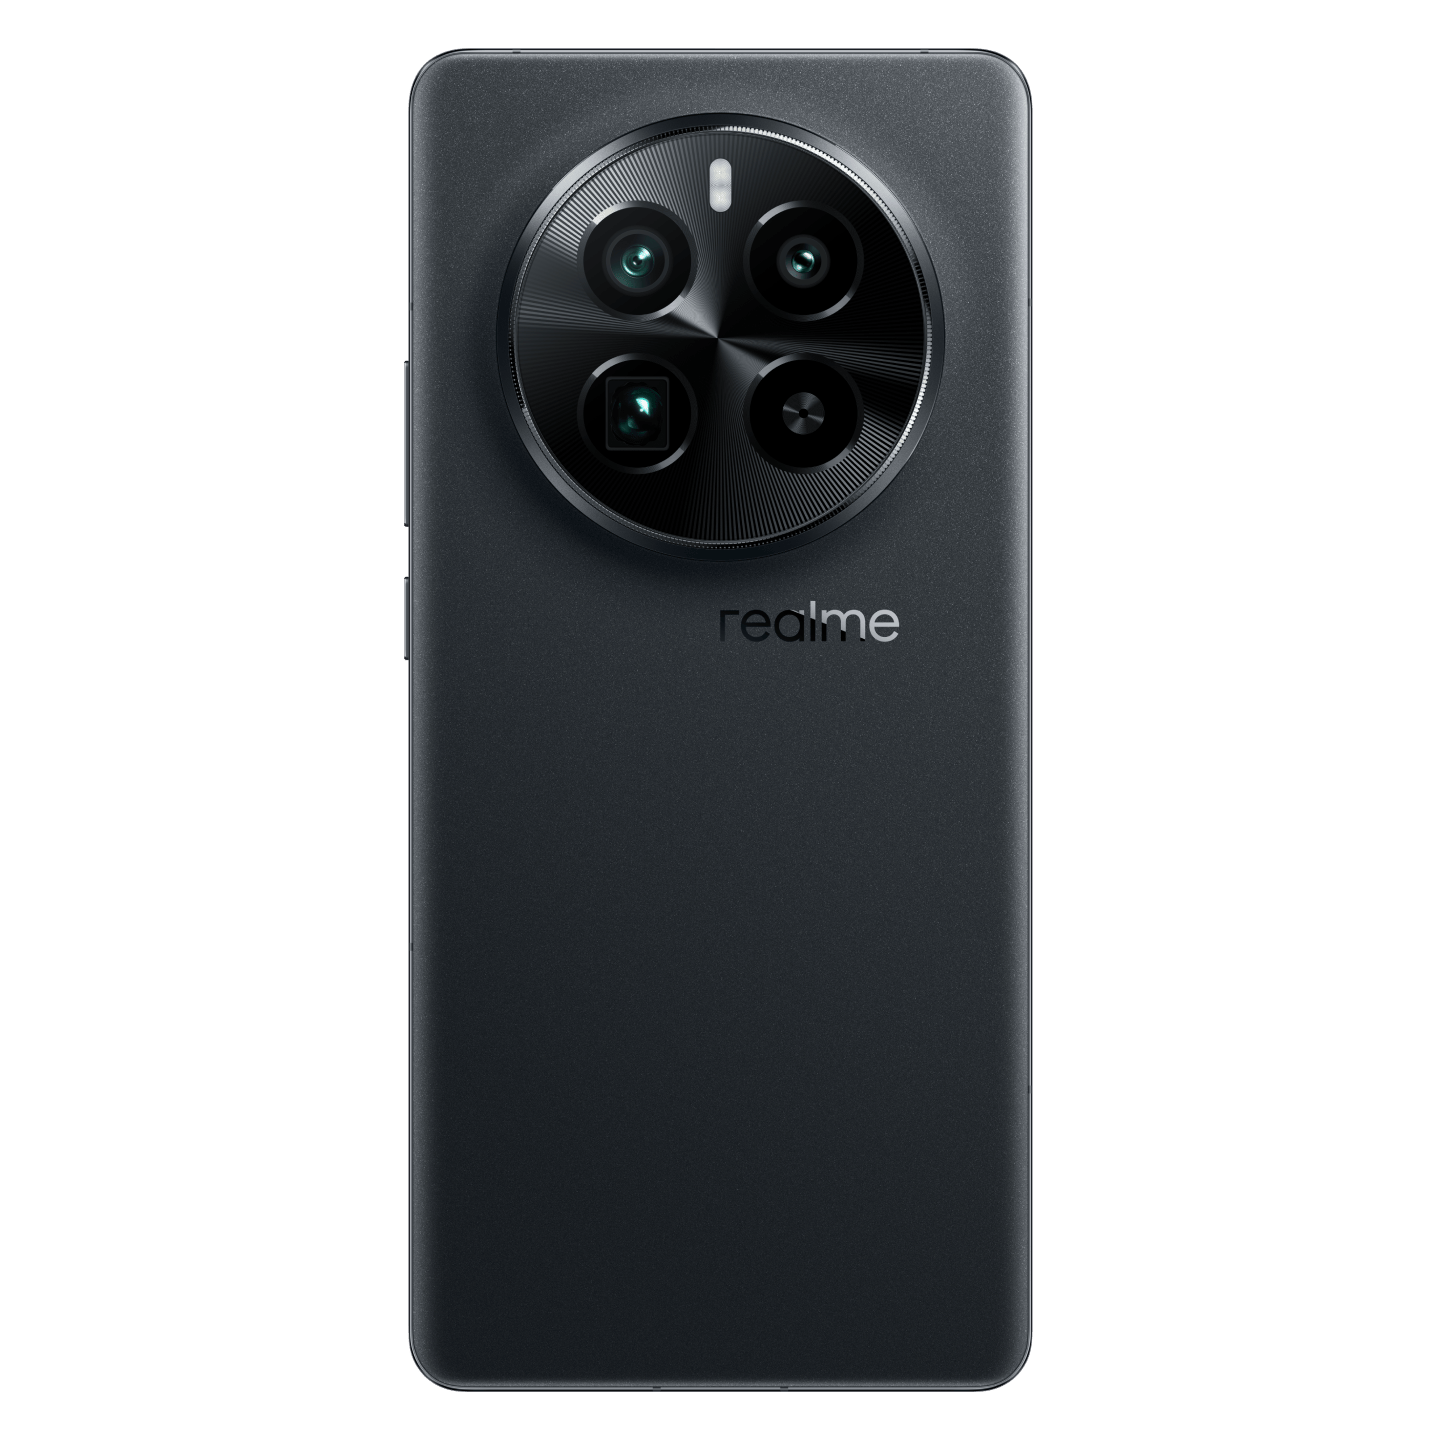 realme to bring GT5 Pro with super-core telephoto imaging system